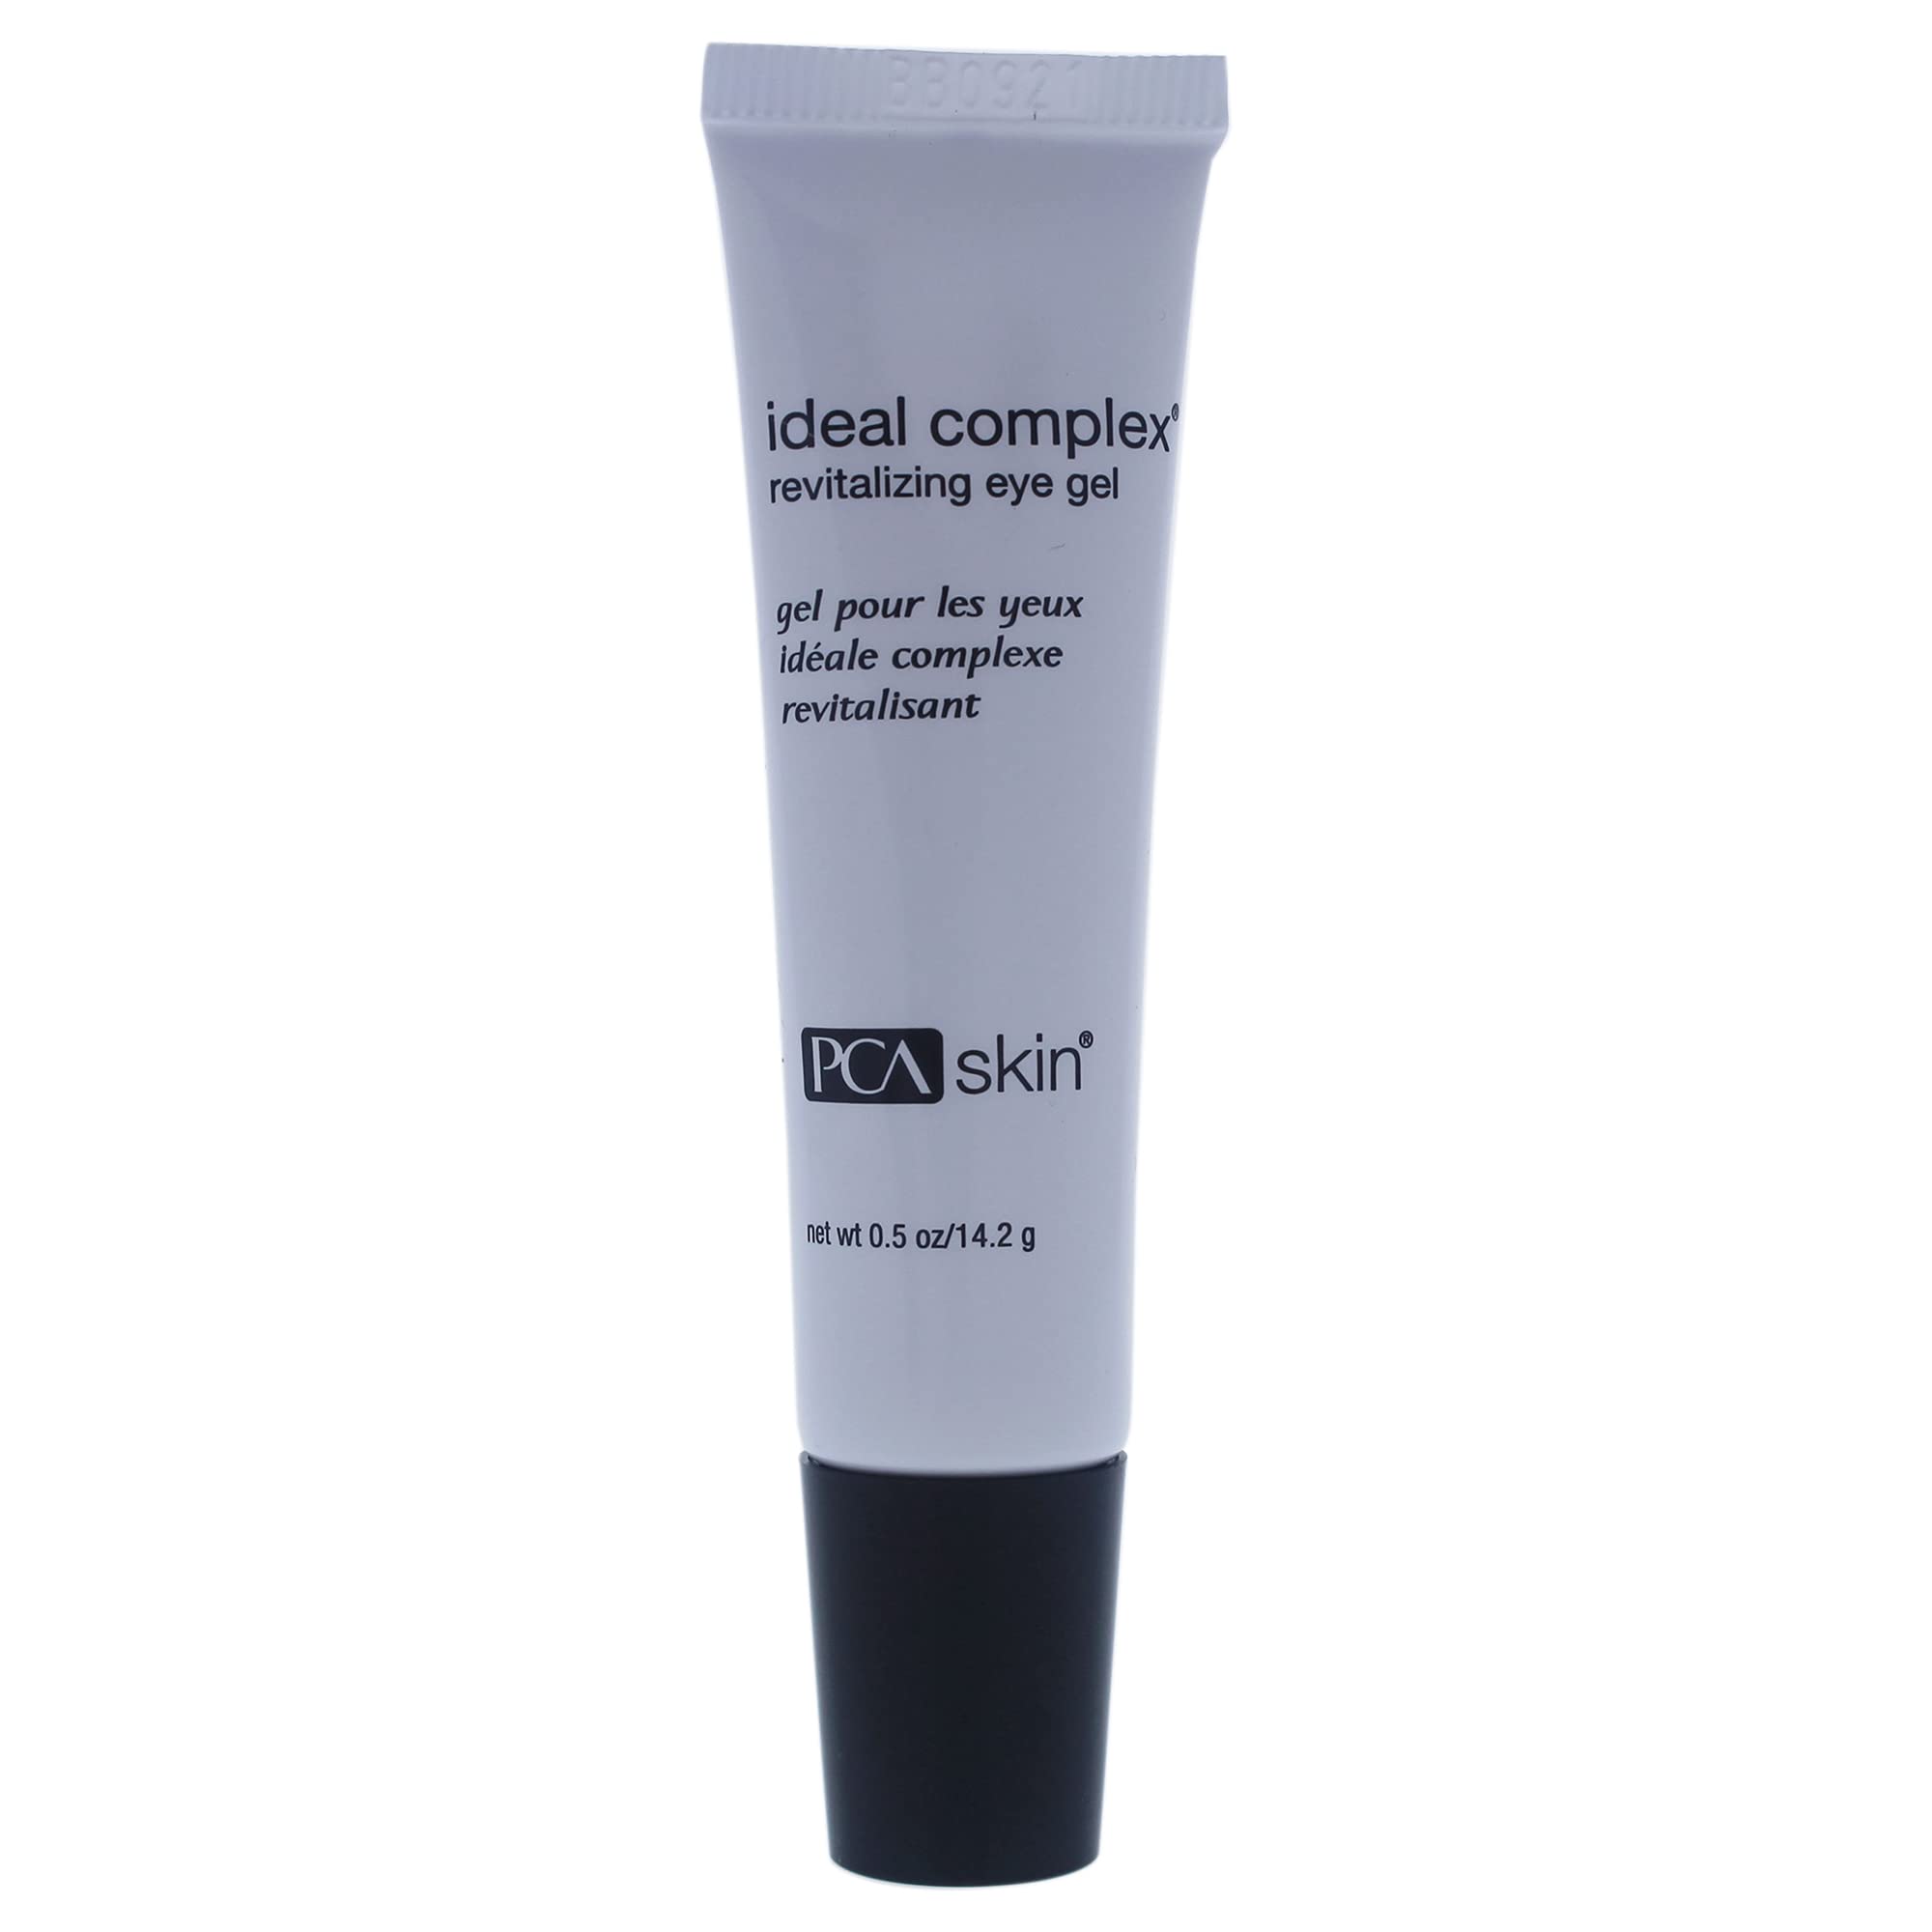 PCA SKIN Ideal Complex Revitalizing Eye Gel, Upper and Under Eye Serum for Dark Circles, Puffiness, Fine Lines, Wrinkles, Discoloration, Sagging Eyelids, Light and Silky Finish, 0.5 oz Tube